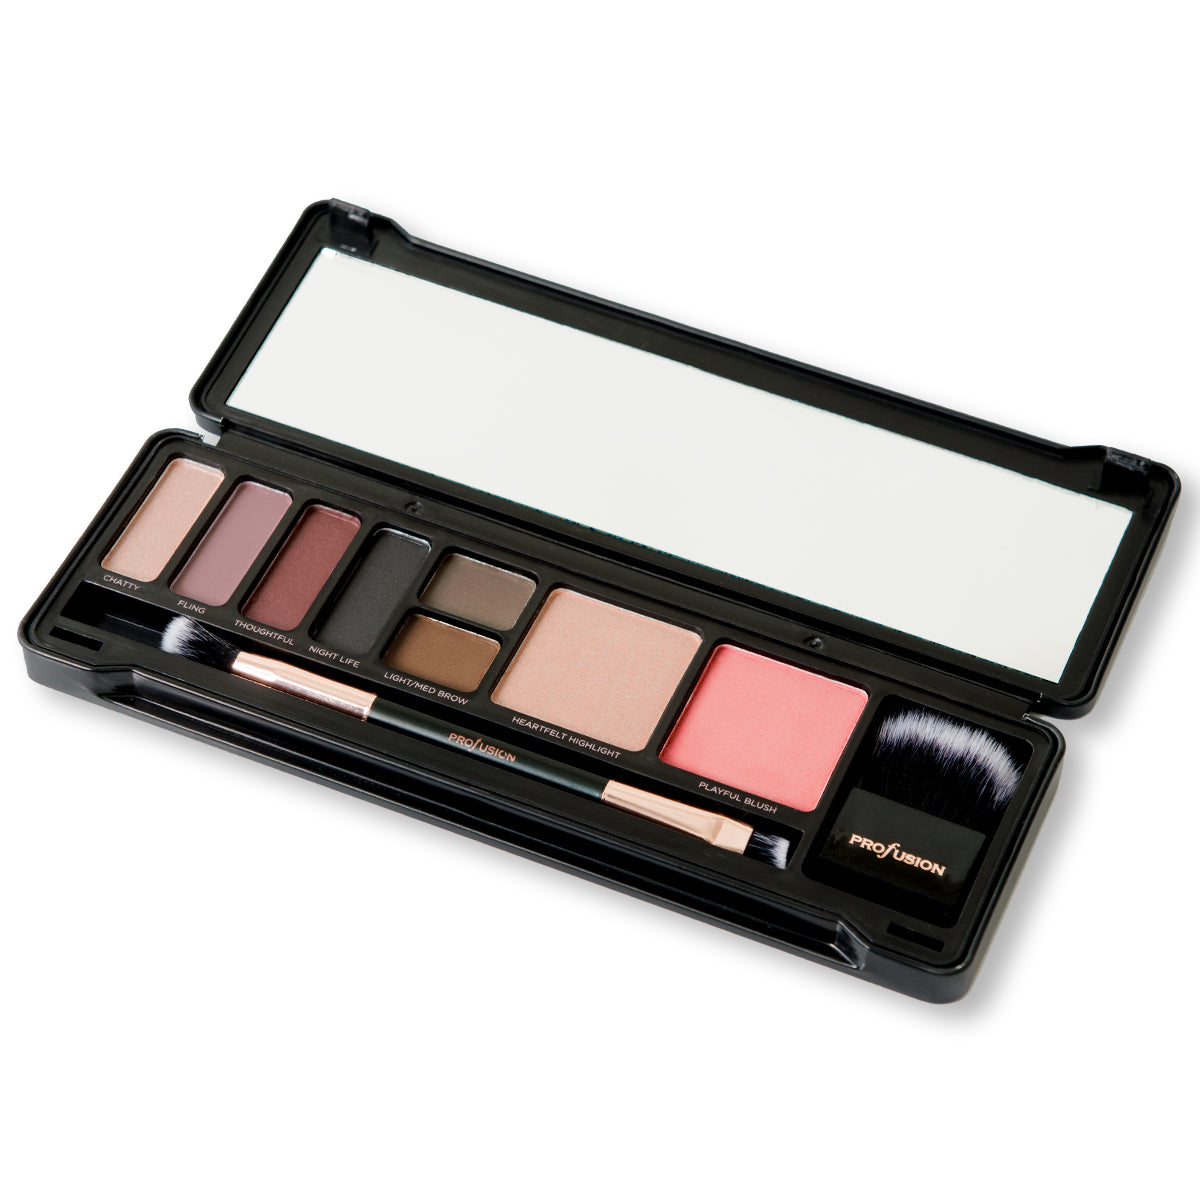 Profusion Glam Face - Order Pro Makeup Kits Now! - Profusion Cosmetics